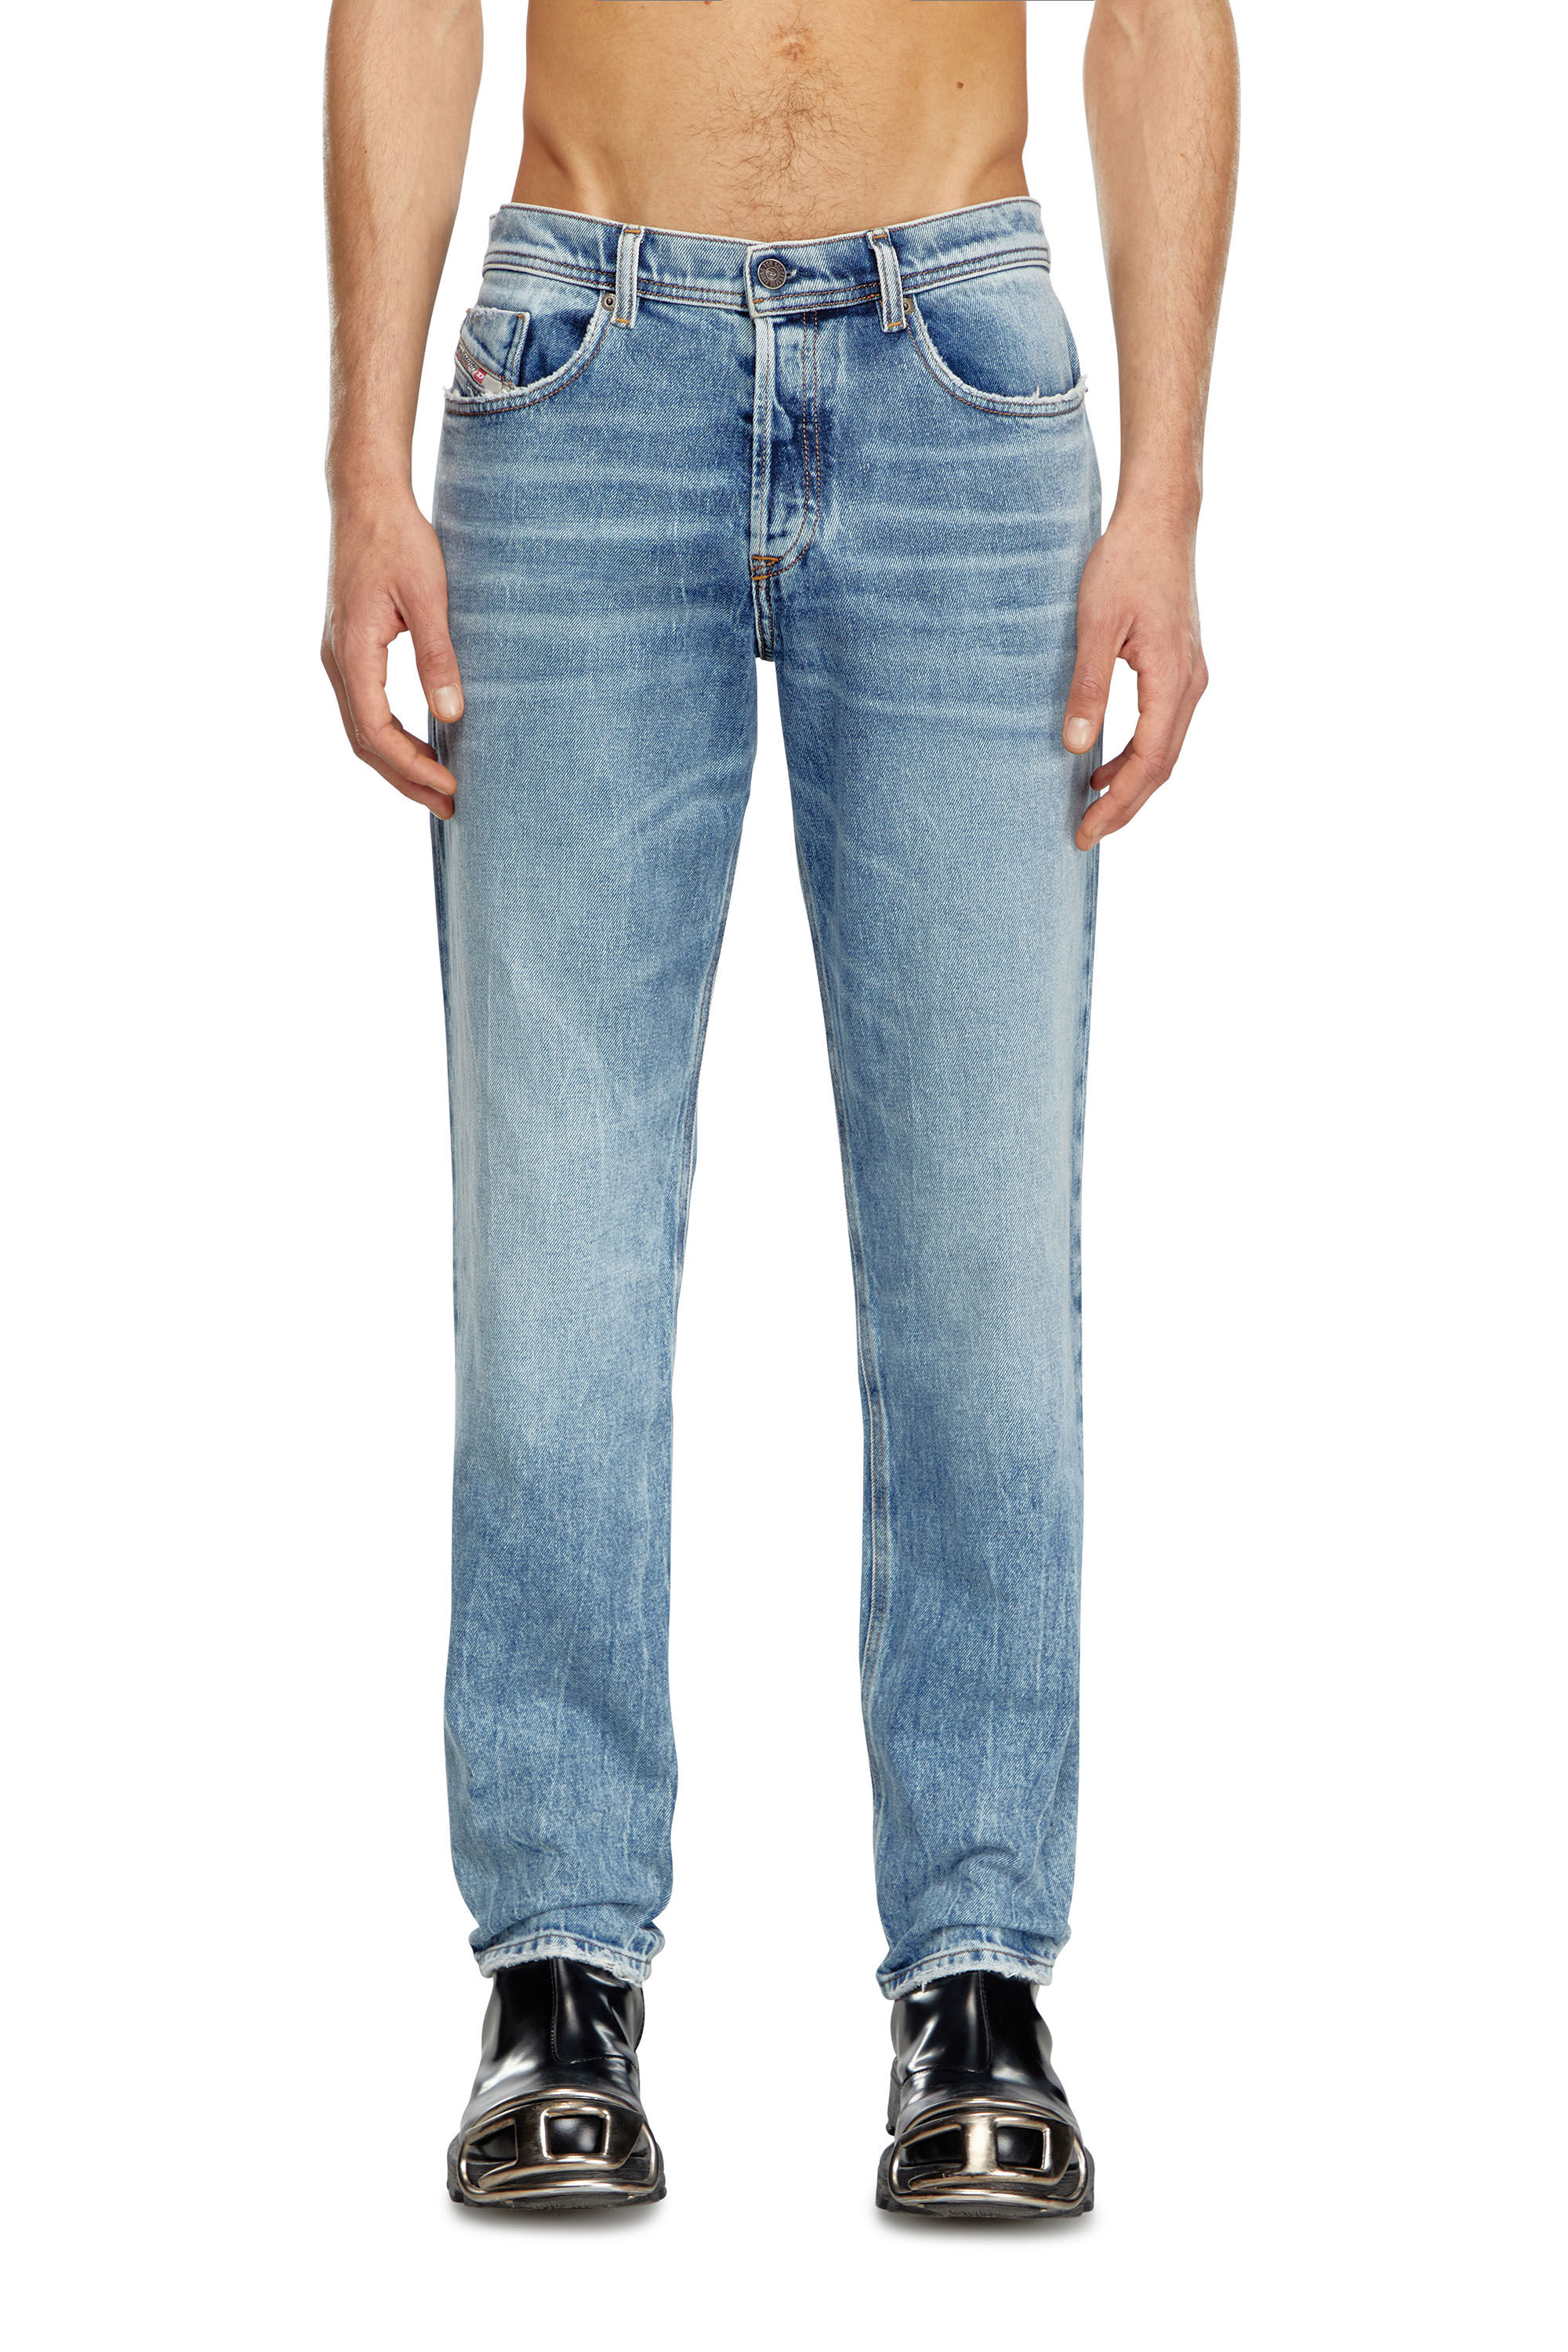 Diesel - Tapered Jeans 2023 D-Finitive 09J54, Hombre Tapered Jeans - 2023 D-Finitive in Azul marino - Image 3